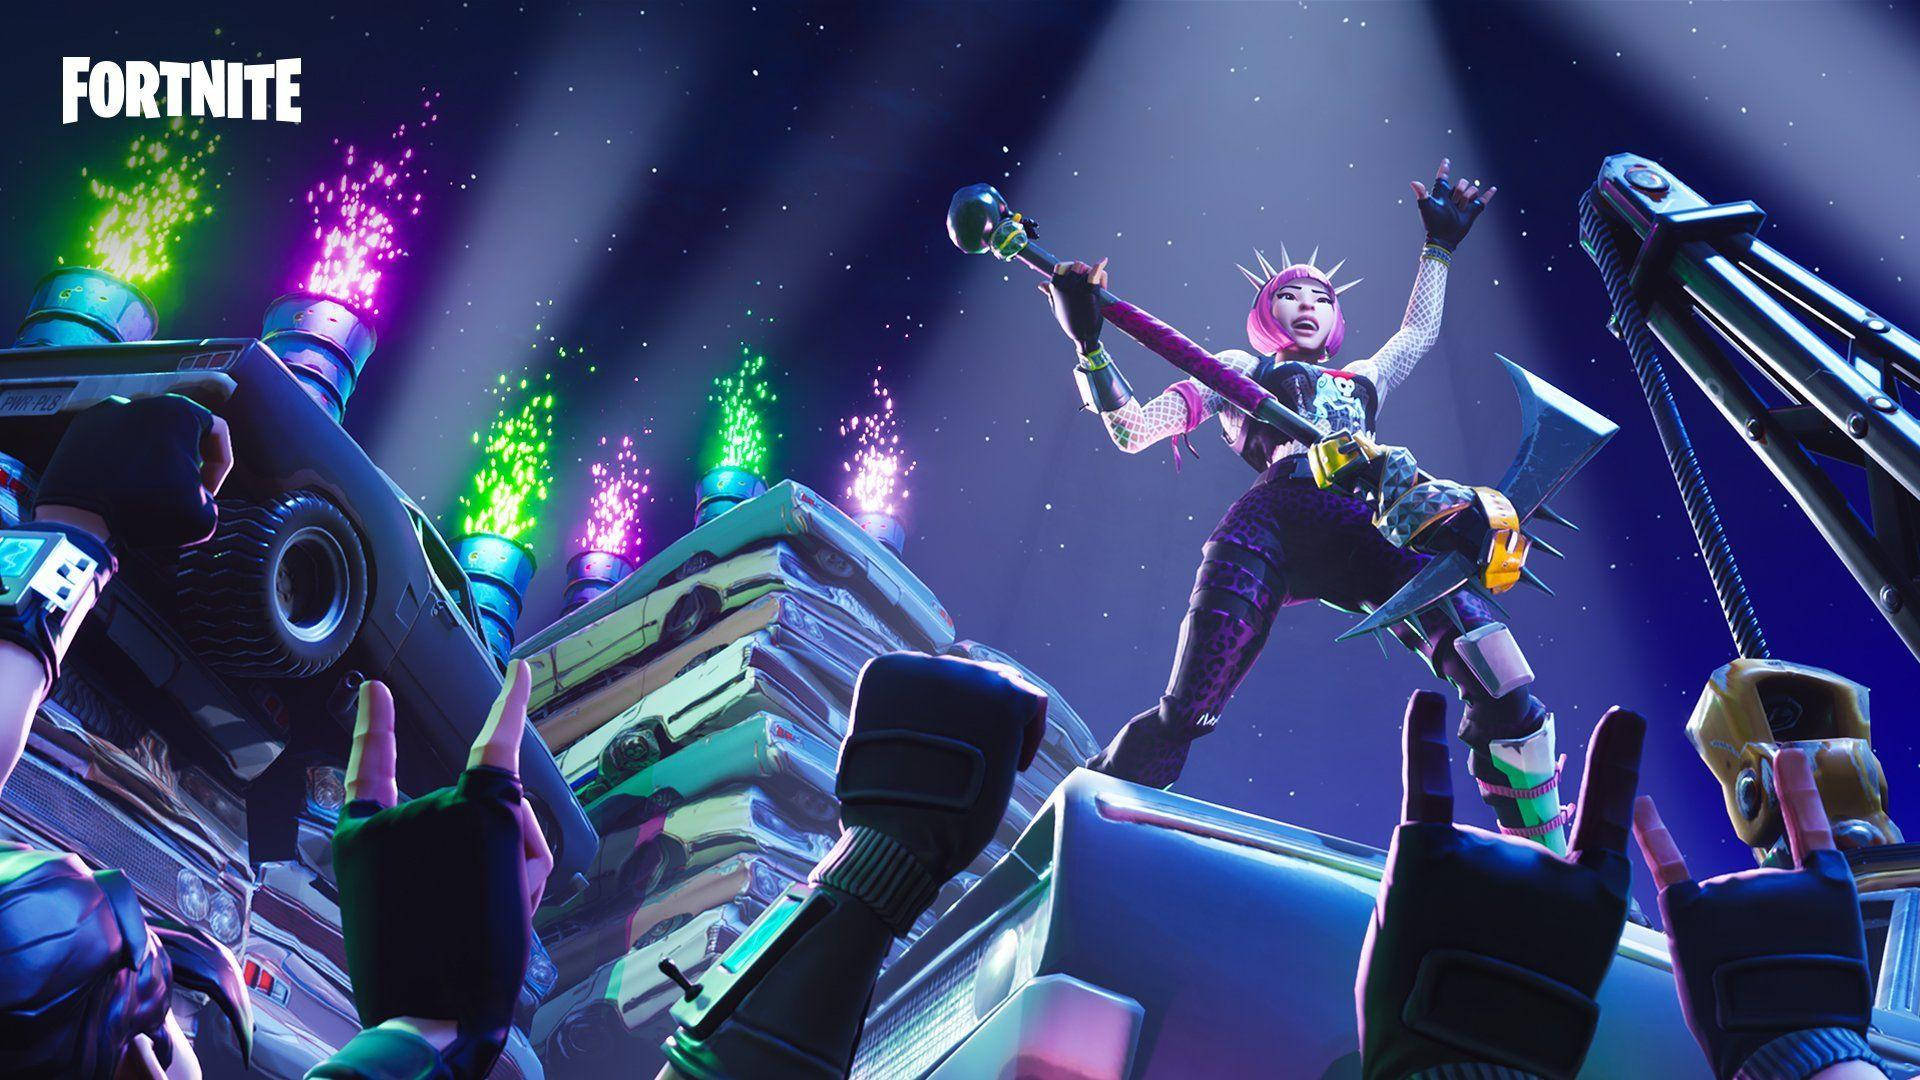 Cool Fortnite Skin At Rock And Roll Concert Background